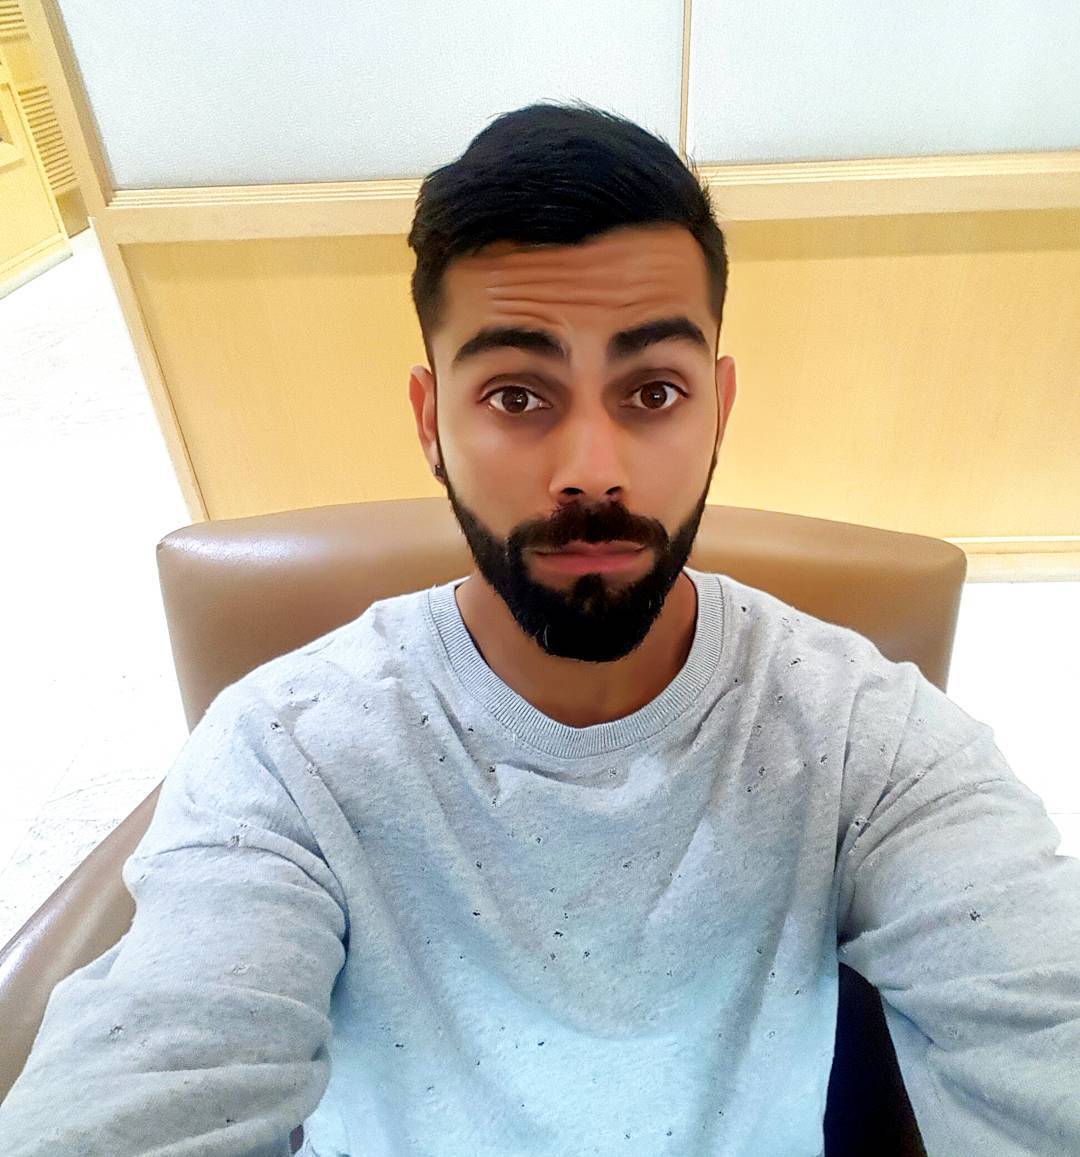 Virat Kohli On Twitter Last Selfie From The States For Now Thanks For All The Love Unbelievable Atmosphere At The Games God Bless All